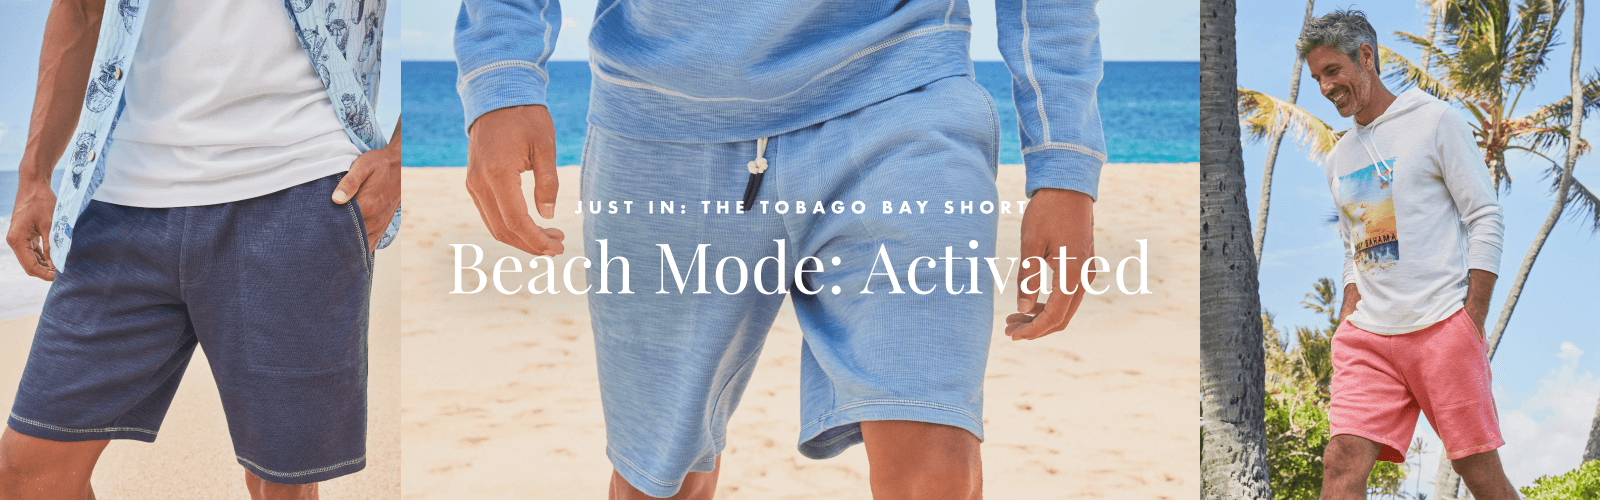 Just In: The Tobago Bay Short  Beach Mode: Activated